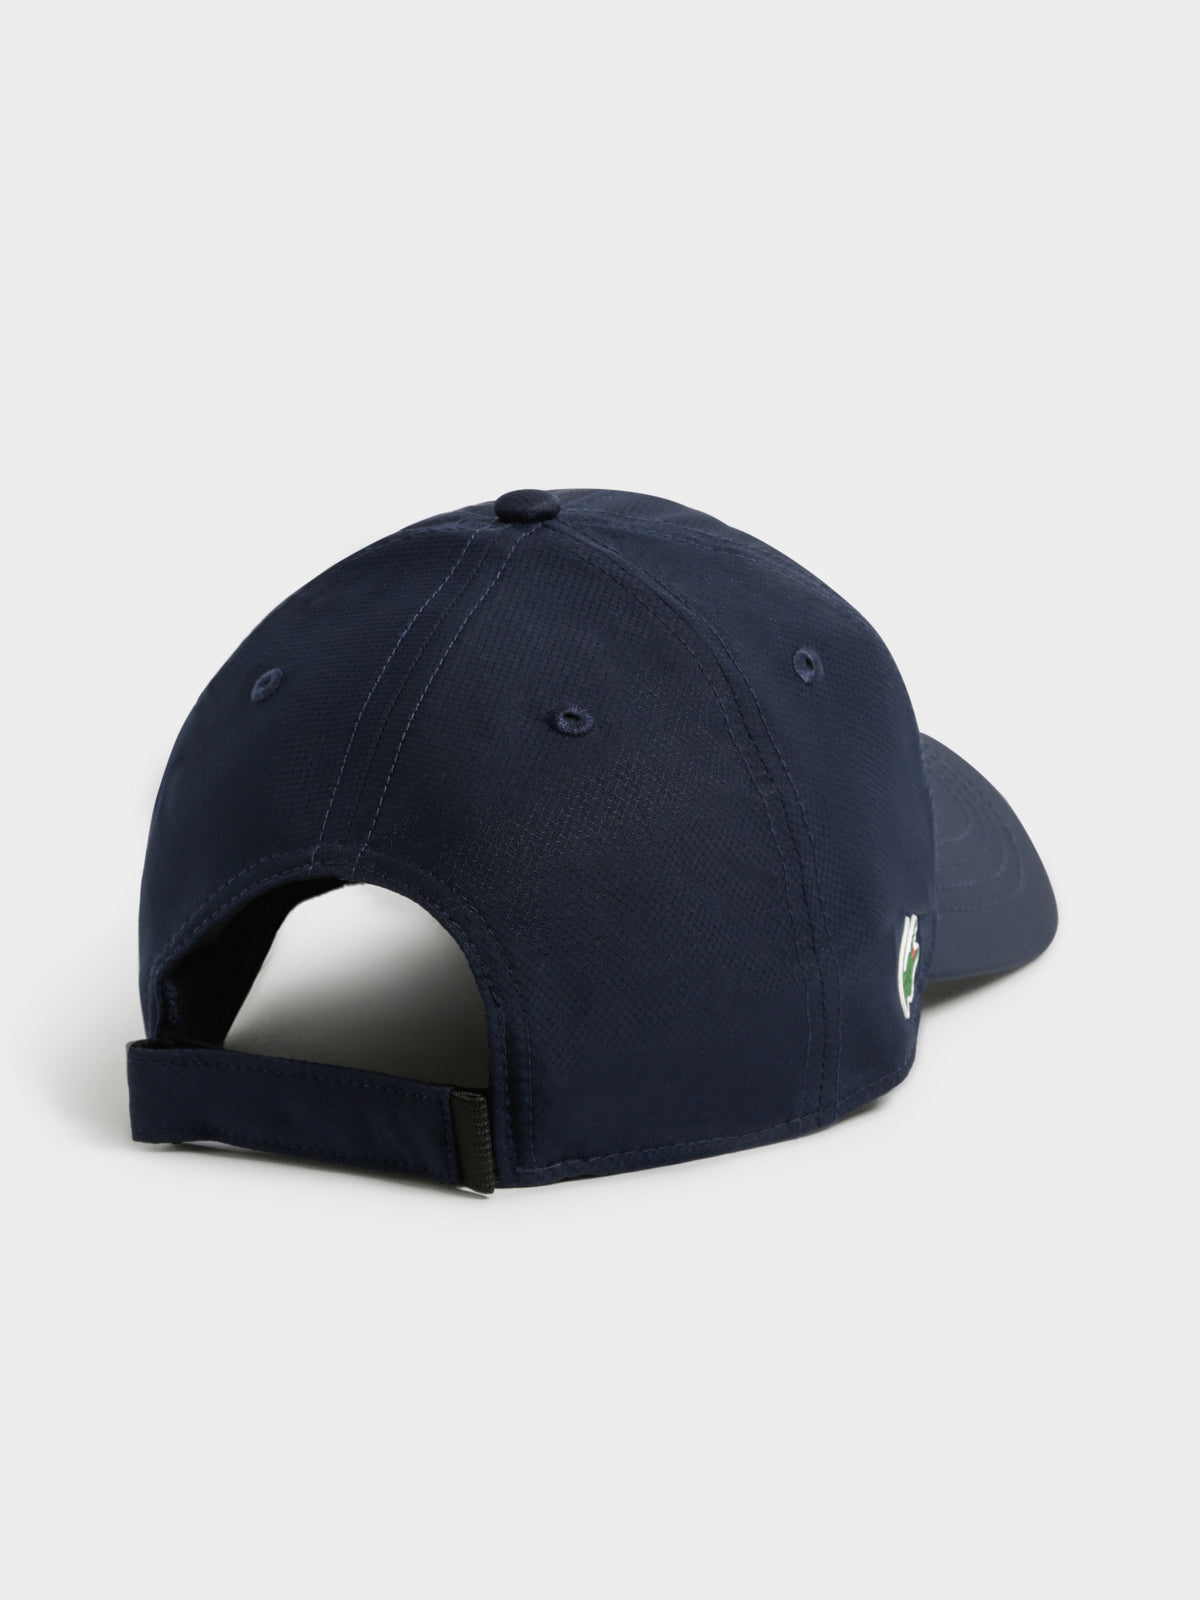 Basic Sport Dry Fit Cap in Navy Blue